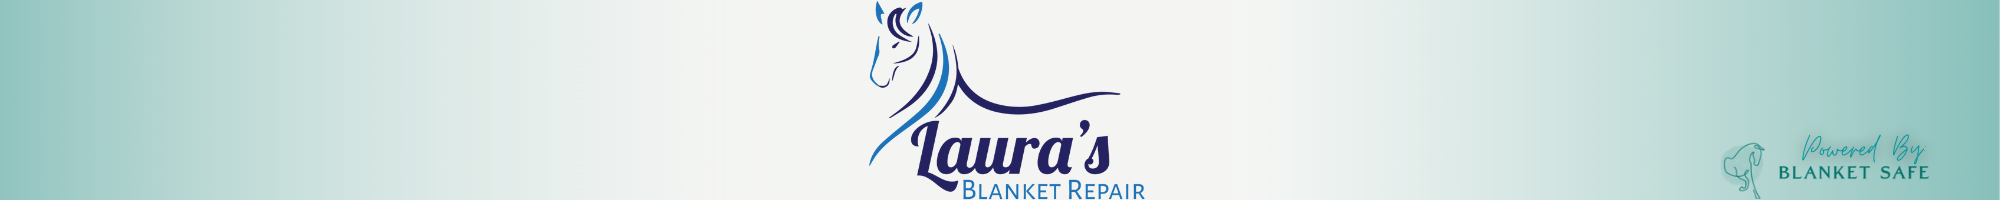 Laura's Blanket Repair, Premier Equine Laundry and Repair services. Proudly Serving the Eastern Shore, Delmarva Peninsula, and Beyond.